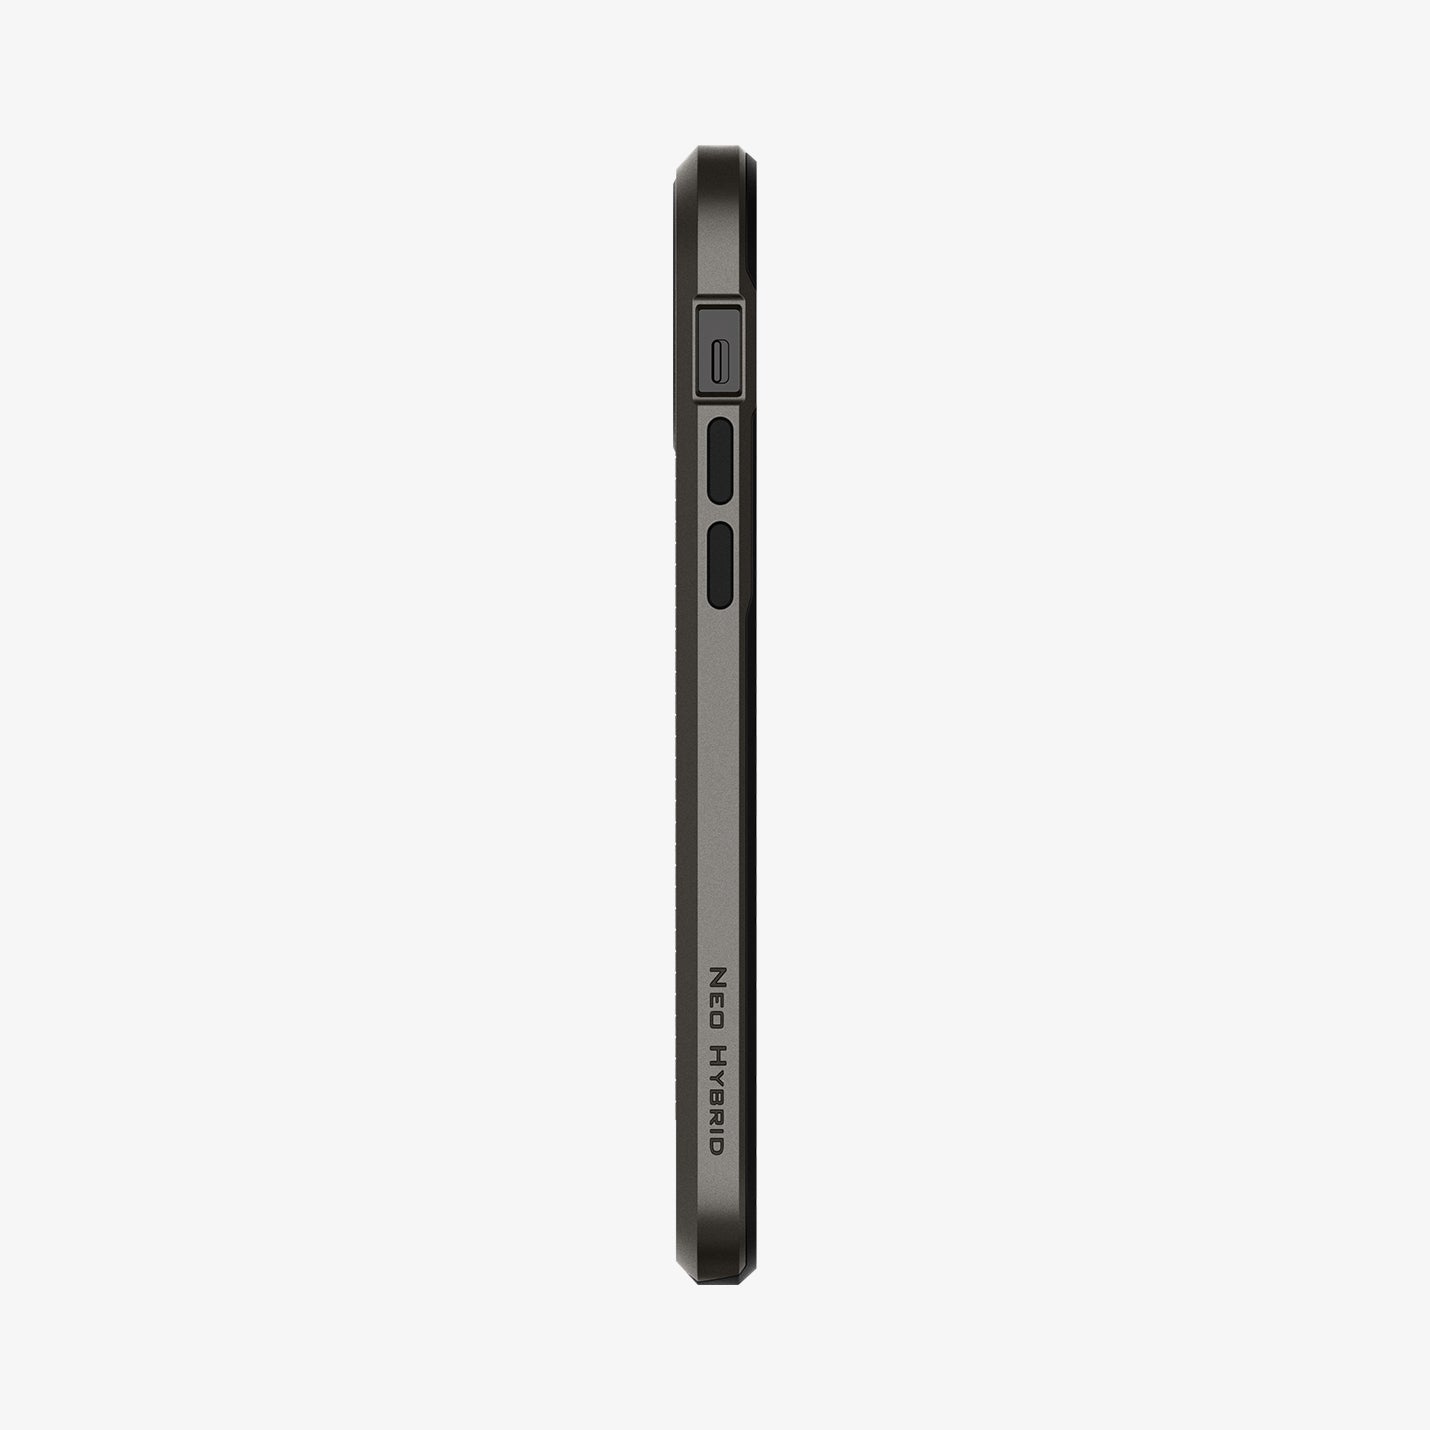 ACS01711 - iPhone 12 / iPhone 12 Pro Case Neo Hybrid in gunmetal showing the side with volume controls